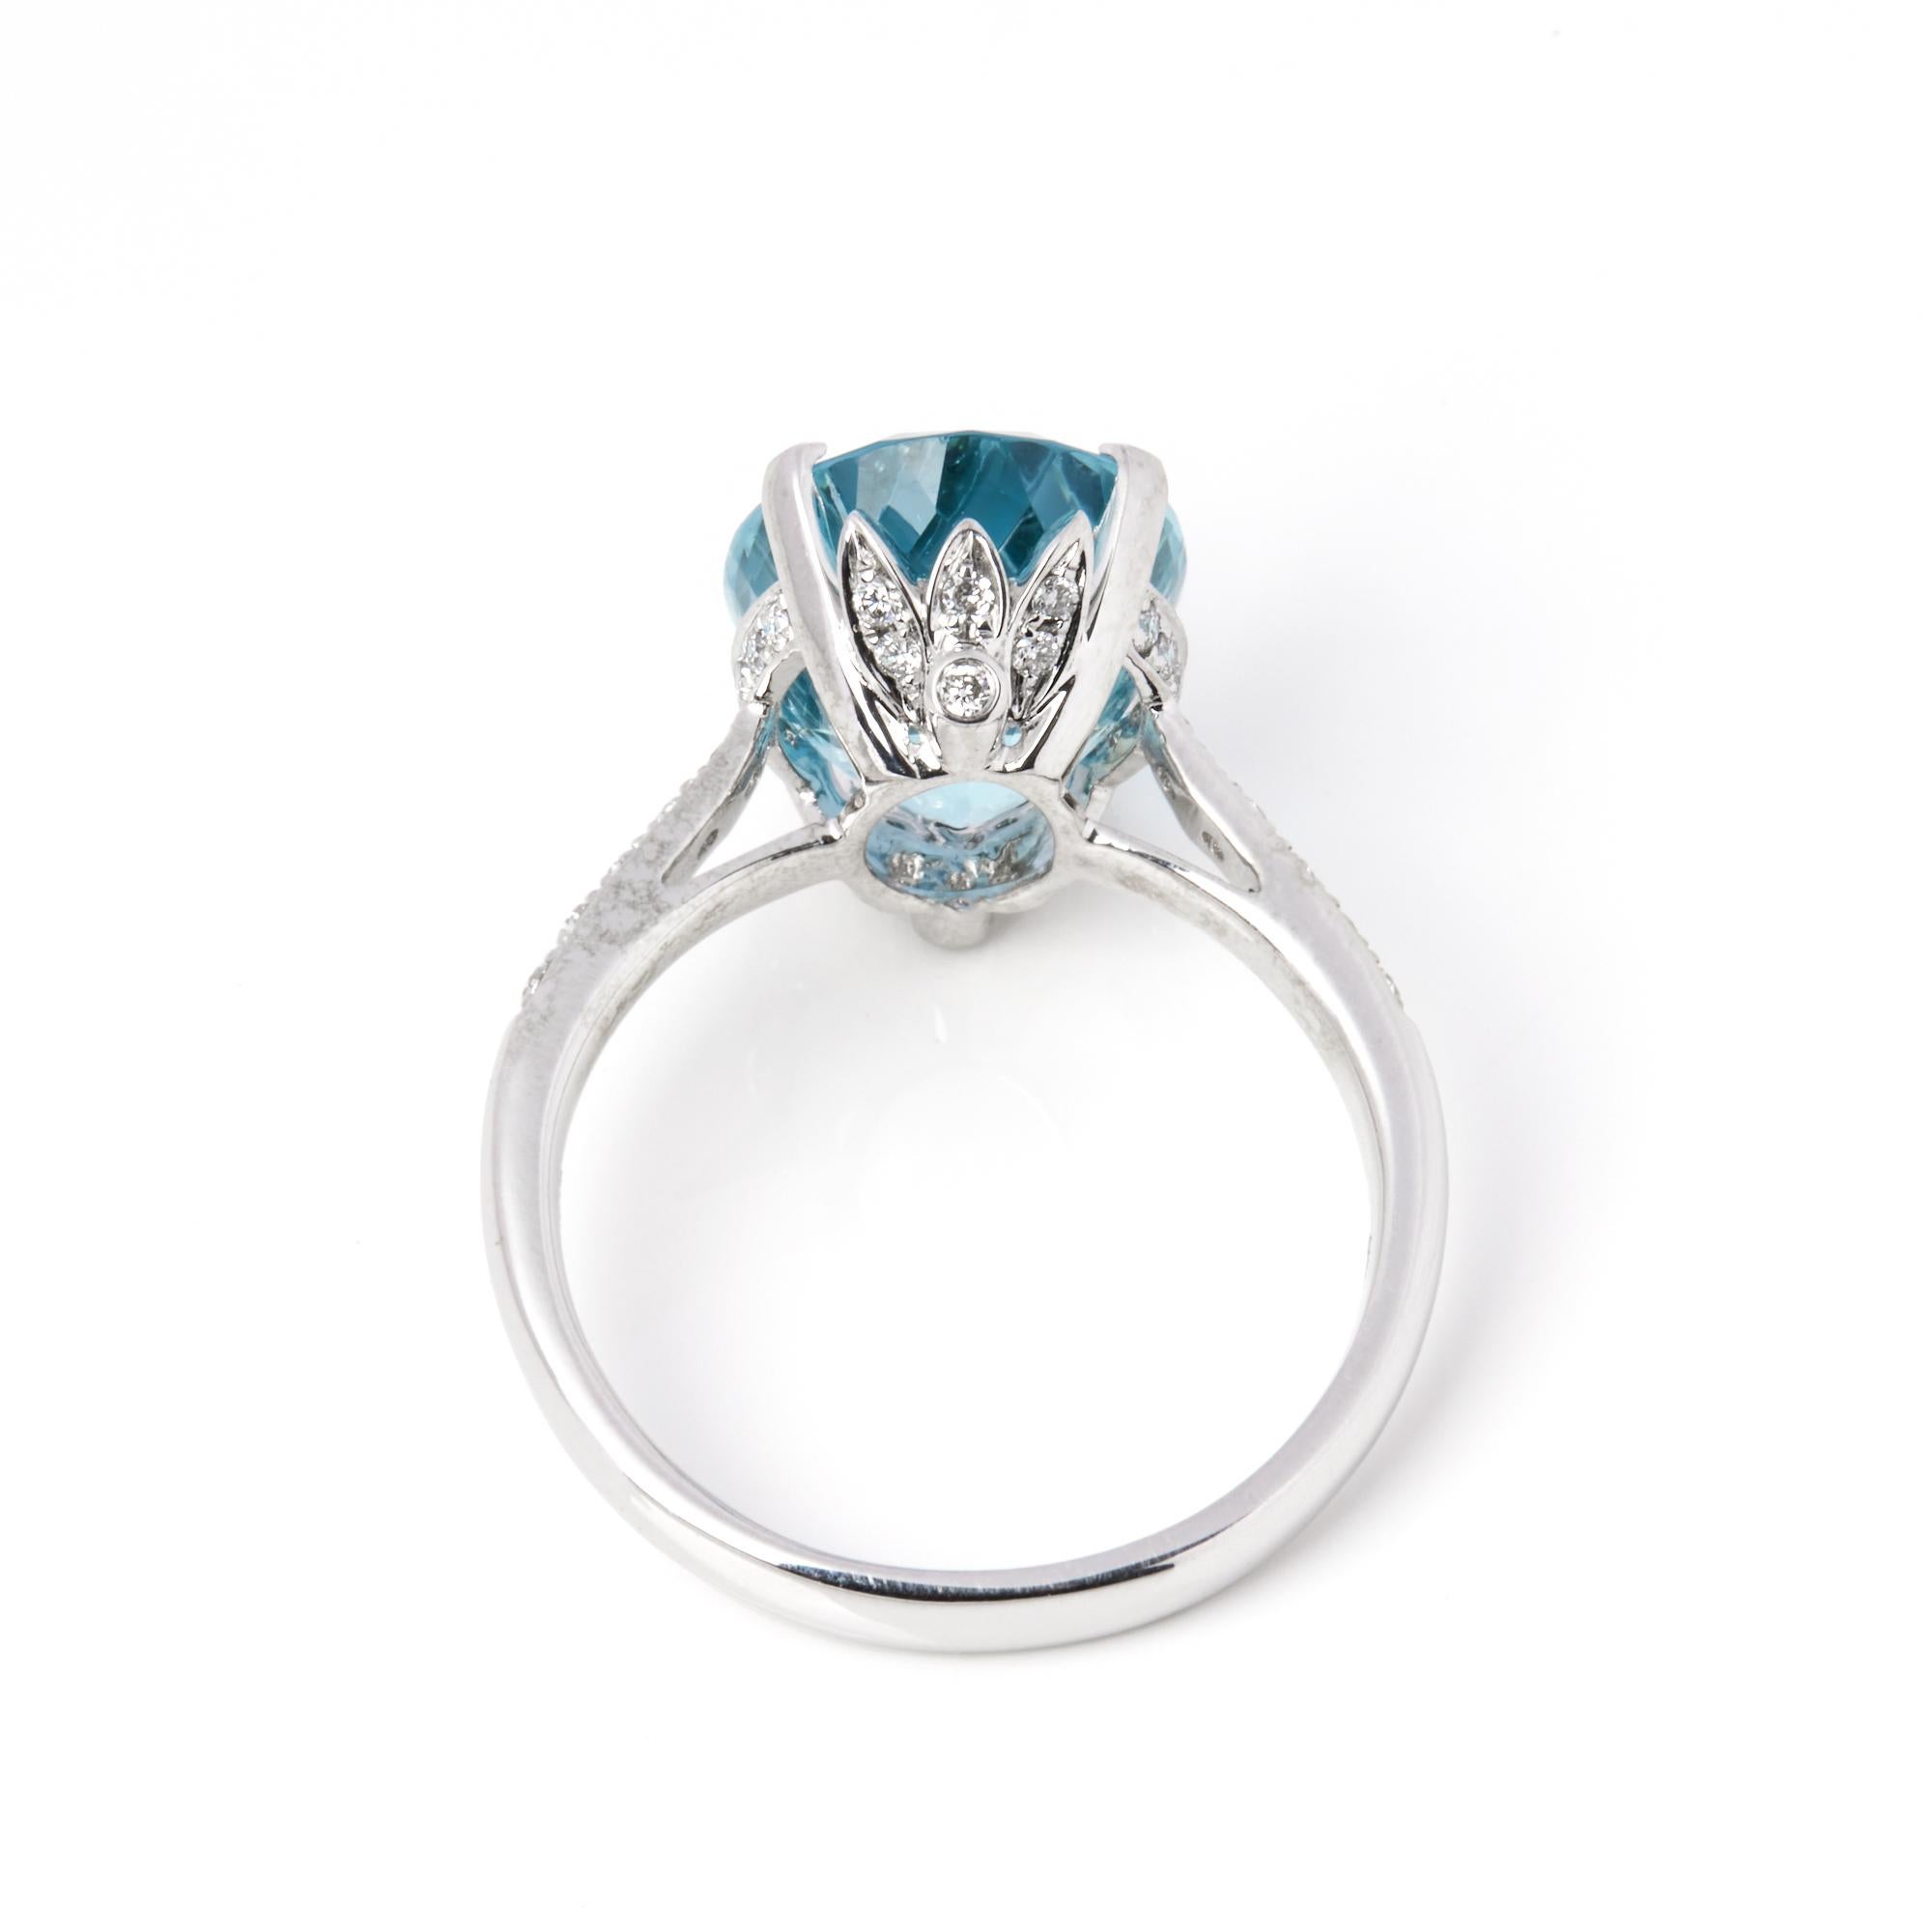 Contemporary David Jerome Certified 5.62ct Oval Cut Aquamarine and Diamond Ring For Sale